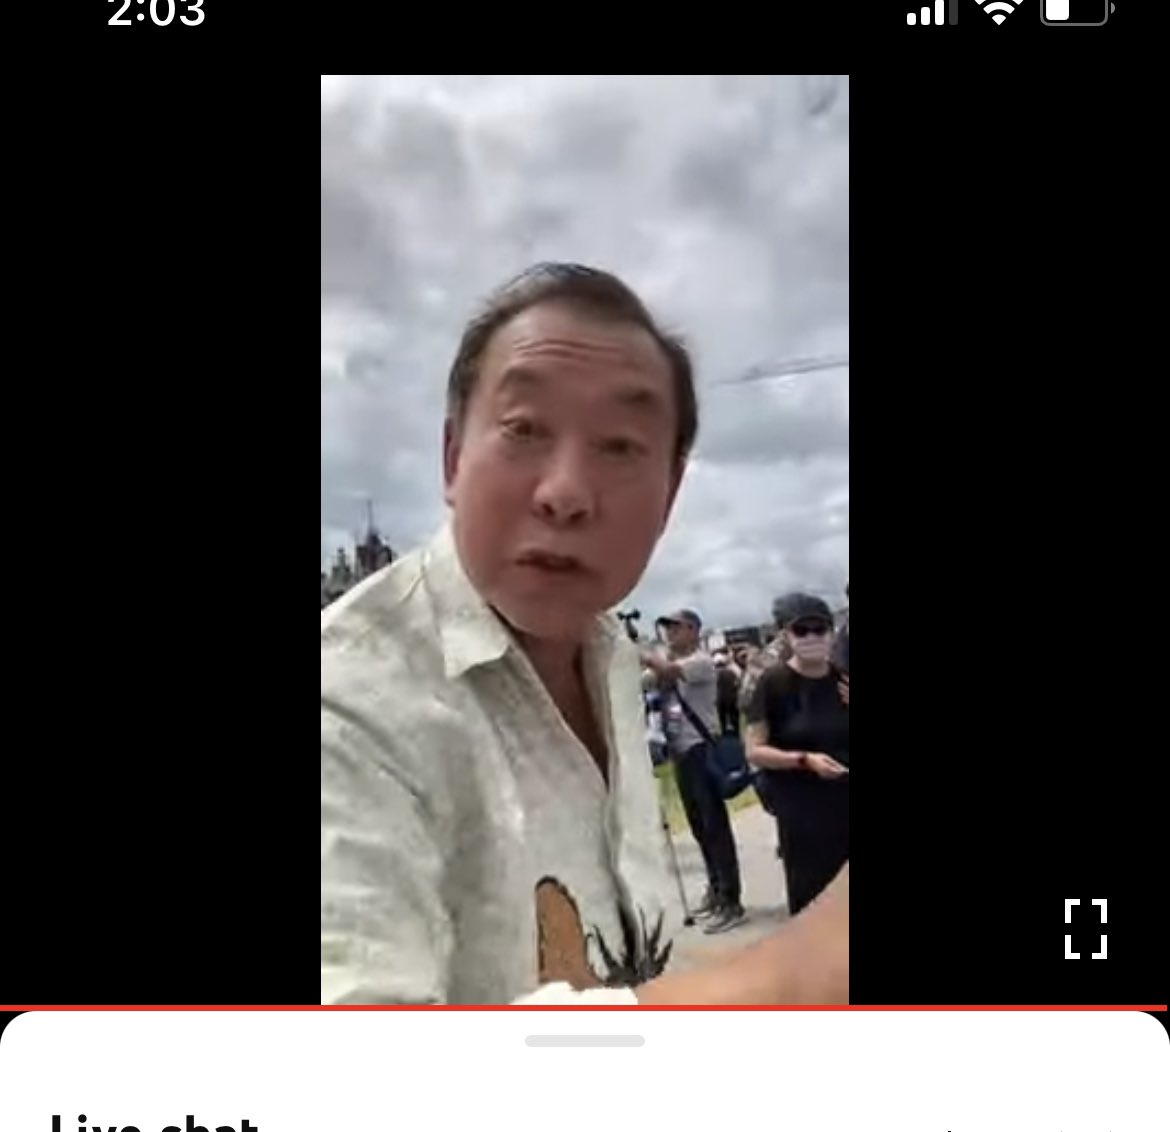 @yaozhang02 has been attacked by this brutal man, while she is making her statement in #ParliamentHill #Ottawa